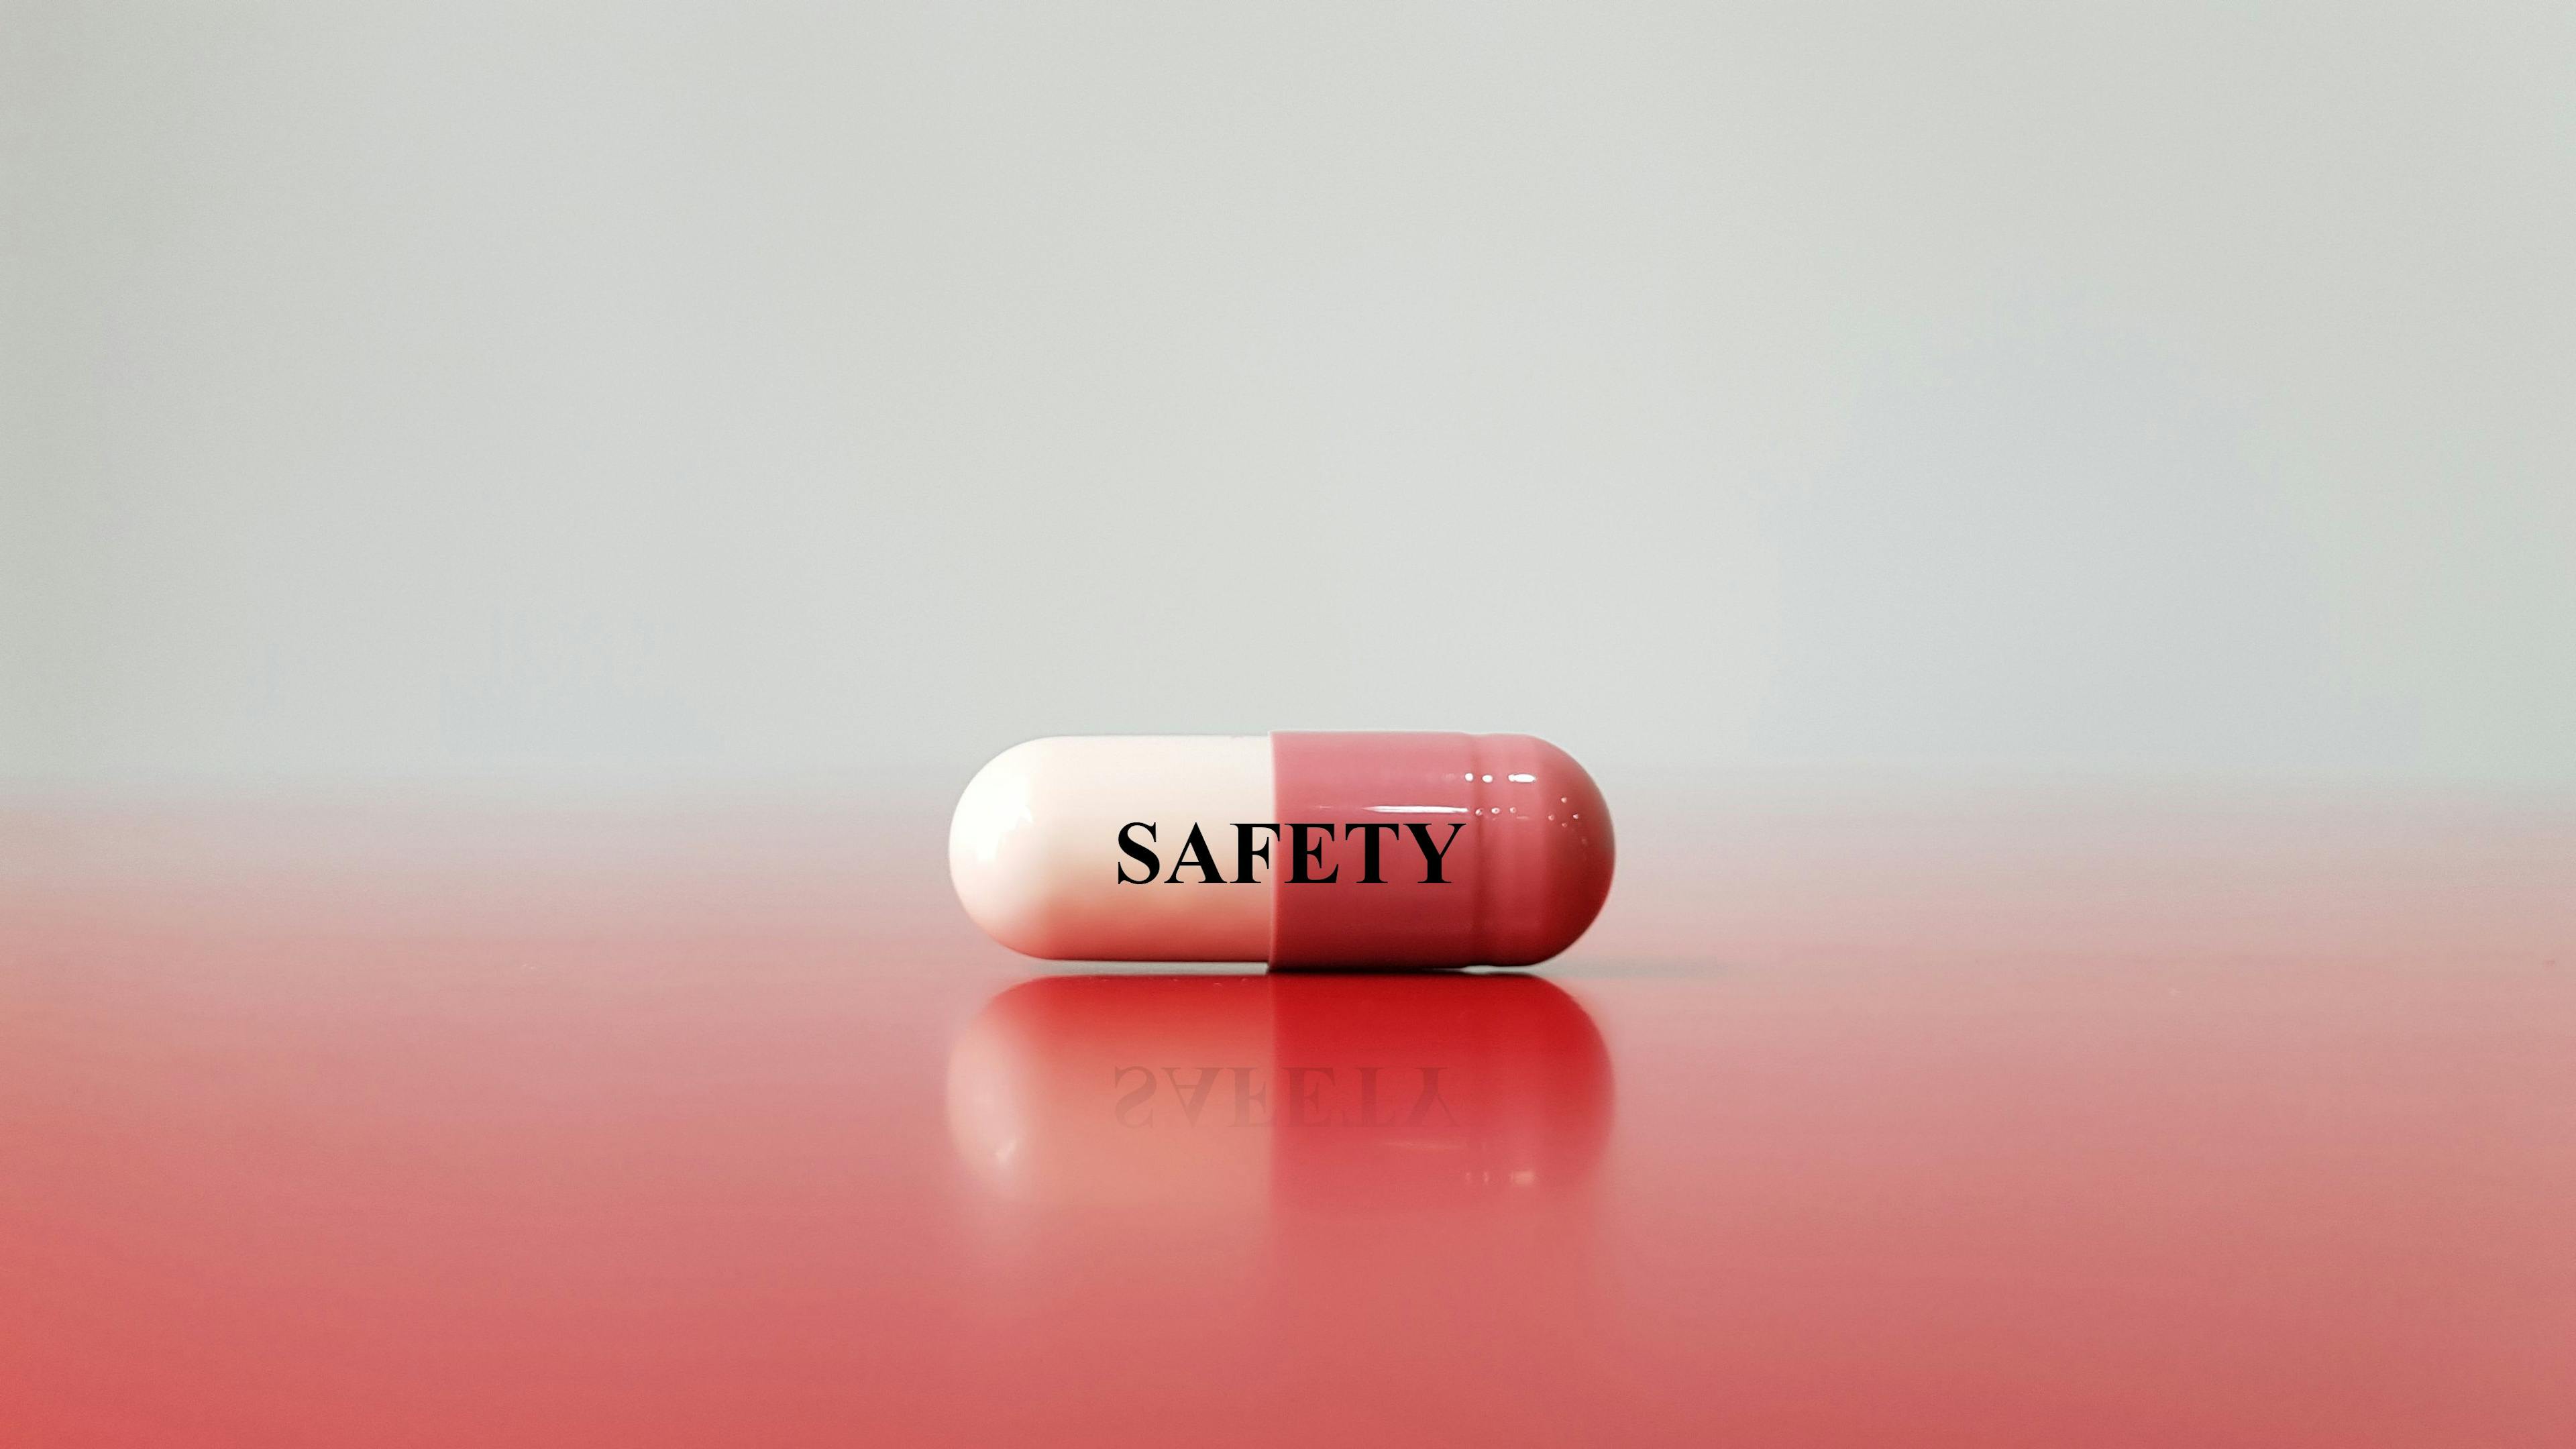 Pharmacovigilance (PV or PhV), also known as drug safety, is the pharmacological science to detection, monitoring, and prevention of adverse effects with pharmaceutical product. Medical safety concept | Image credit: Joel bubble ben - stock.adobe.com 